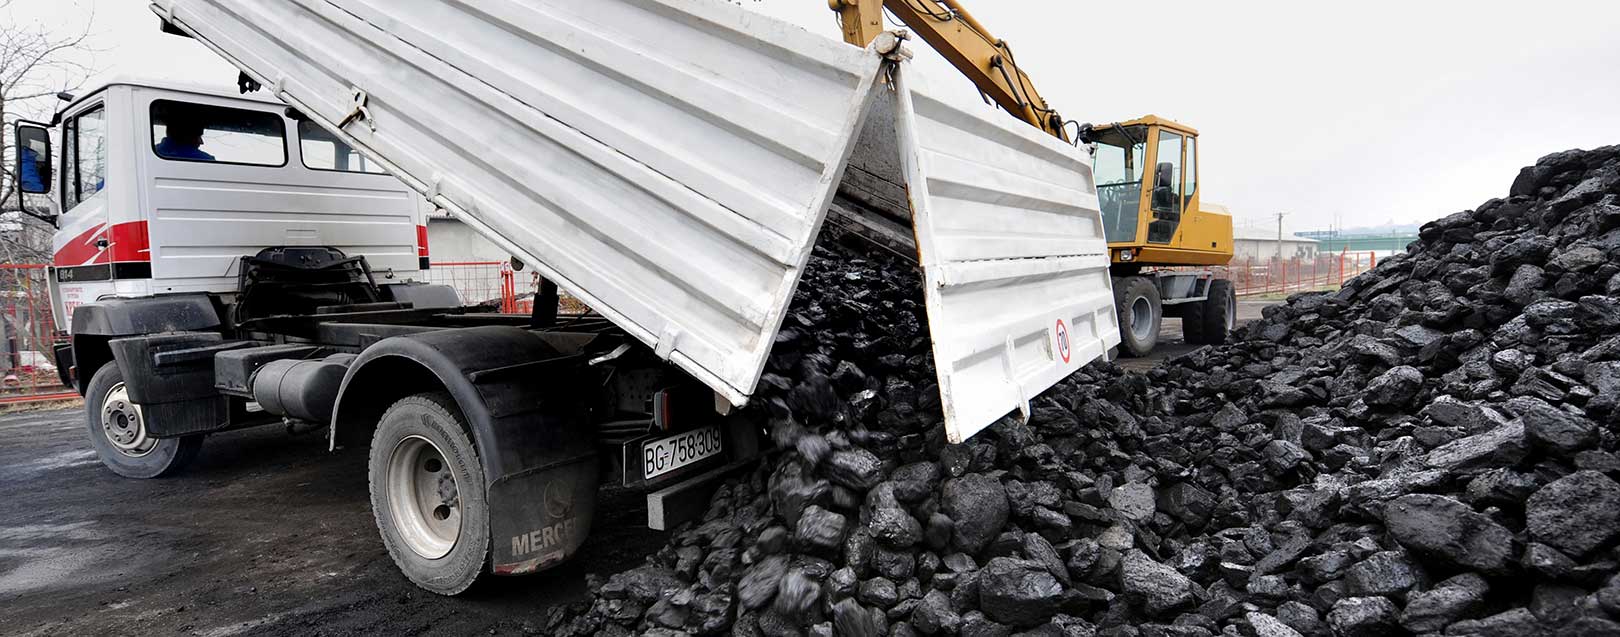 Govt has allocated 75 coal mines for end-users: Goyal